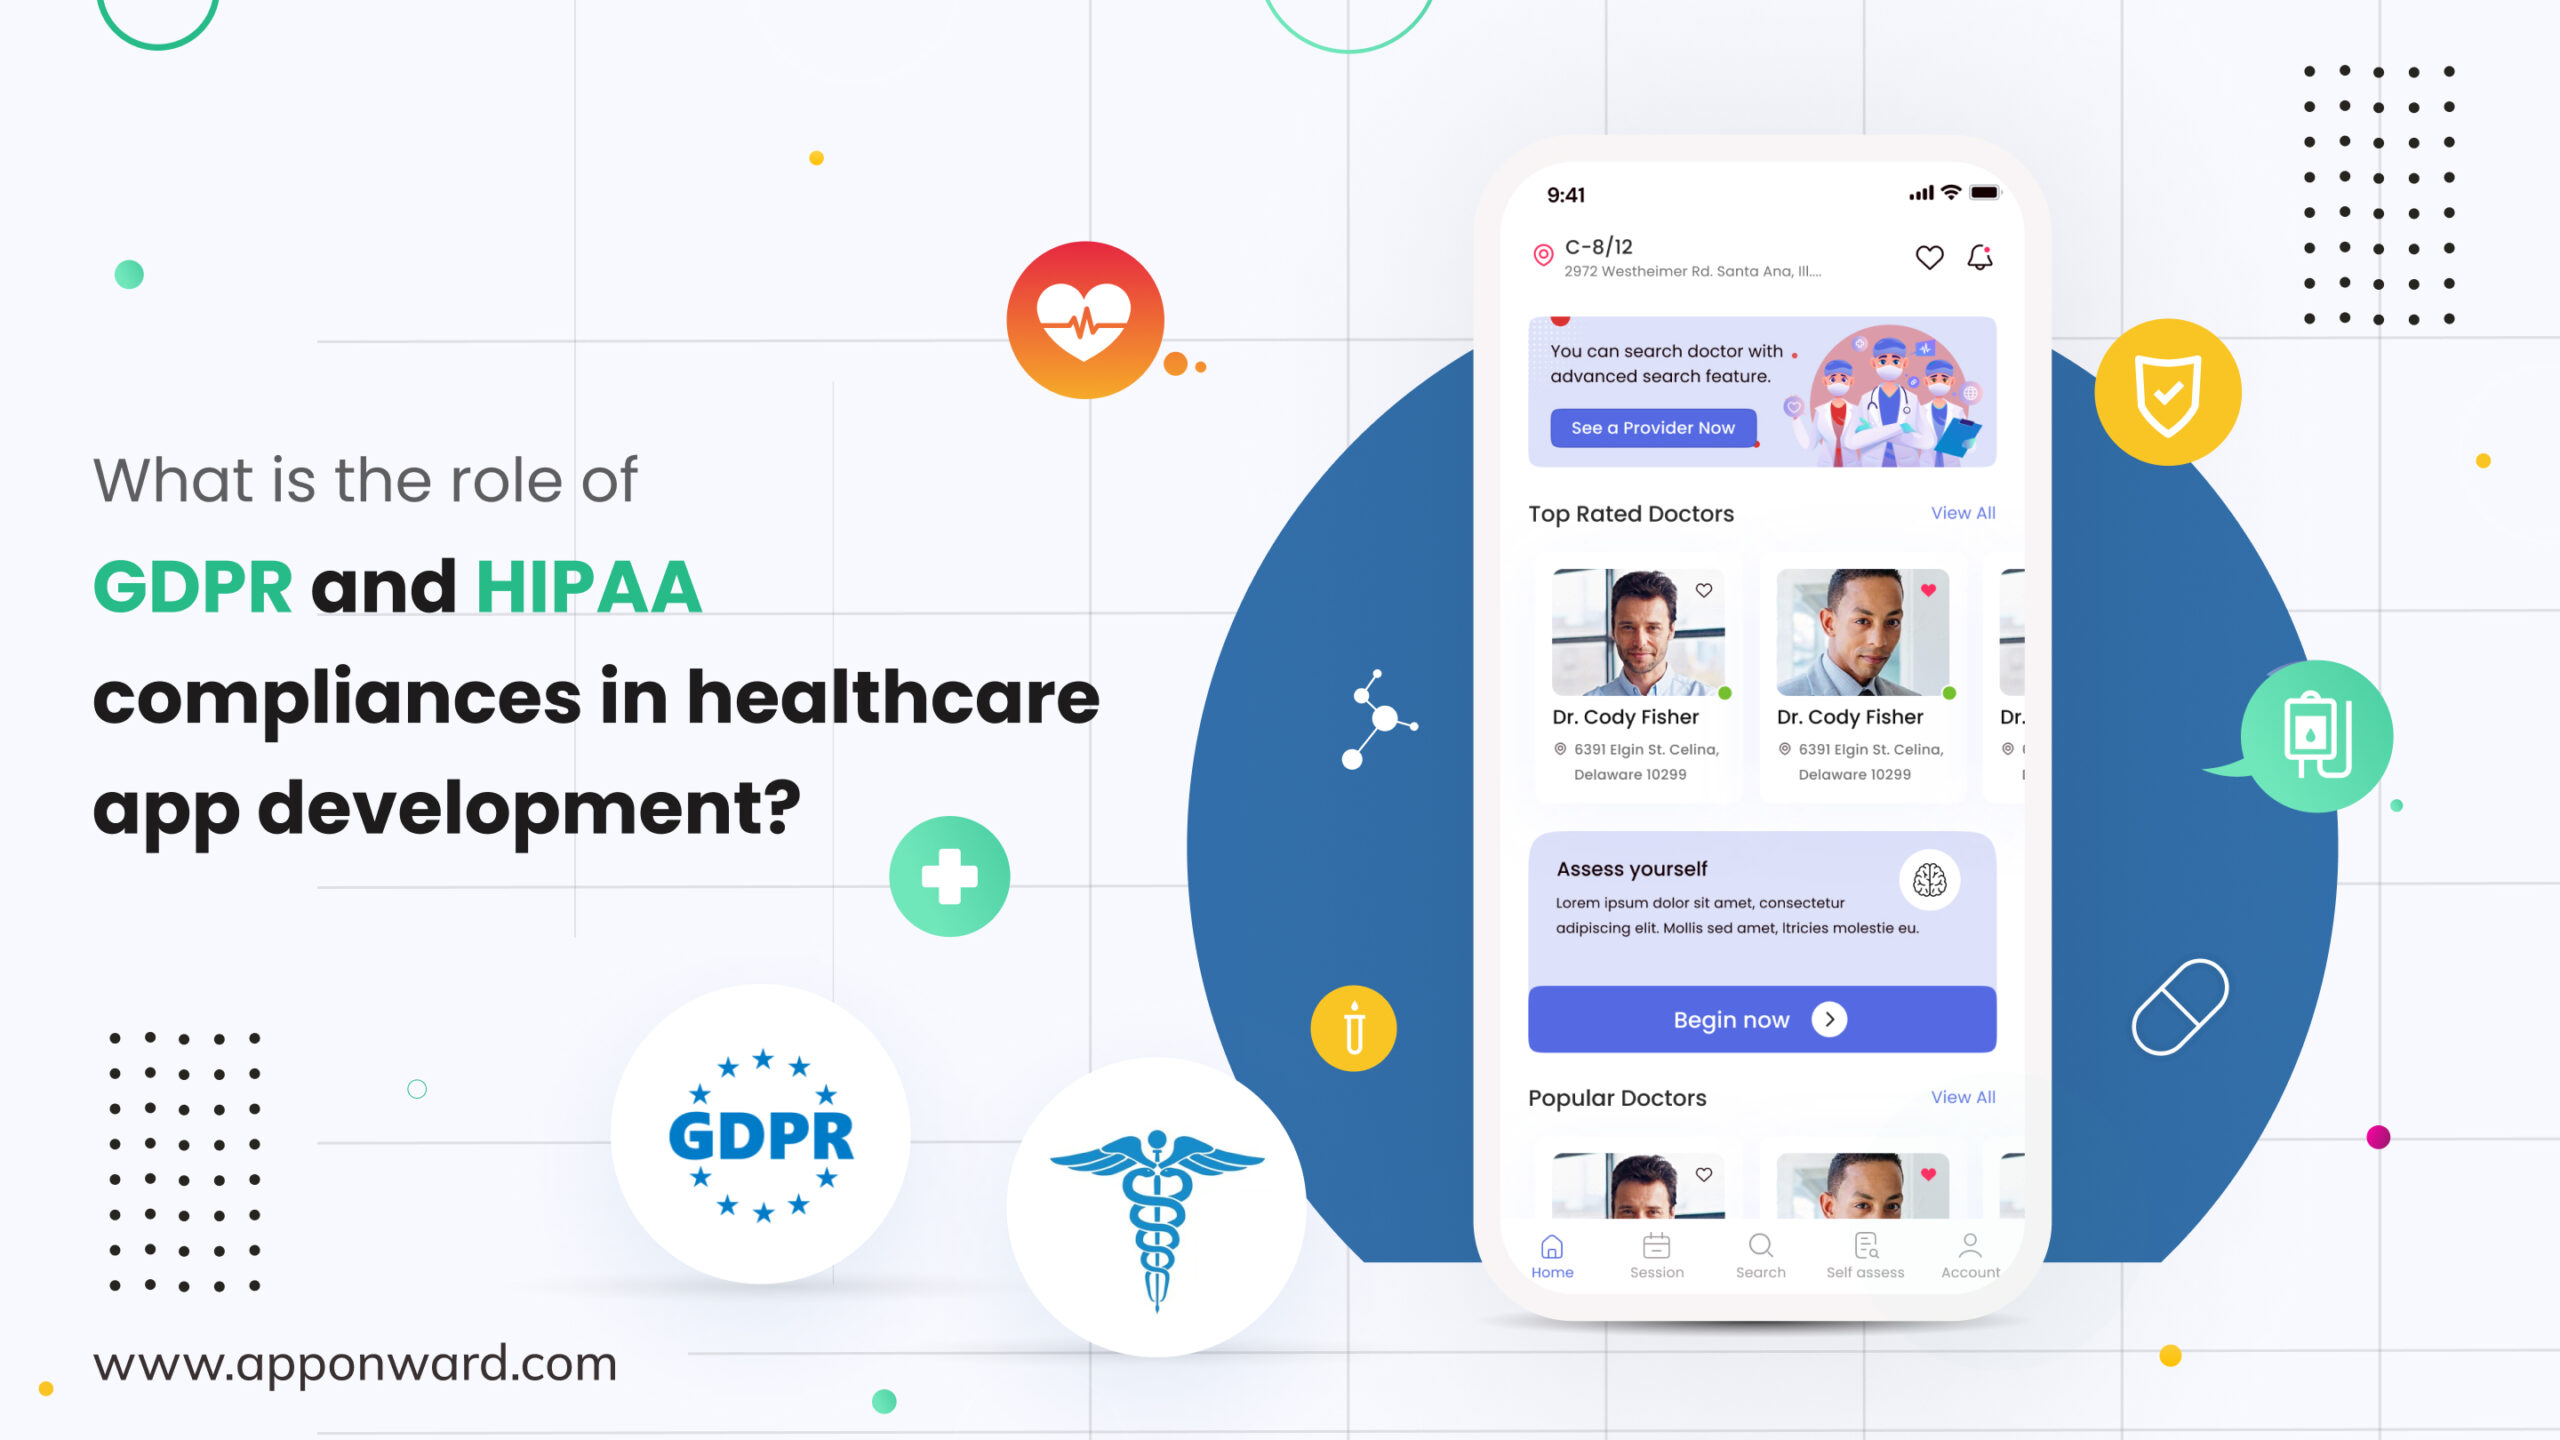 What is the role of GDPR and HIPAA compliances in healthcare app development?